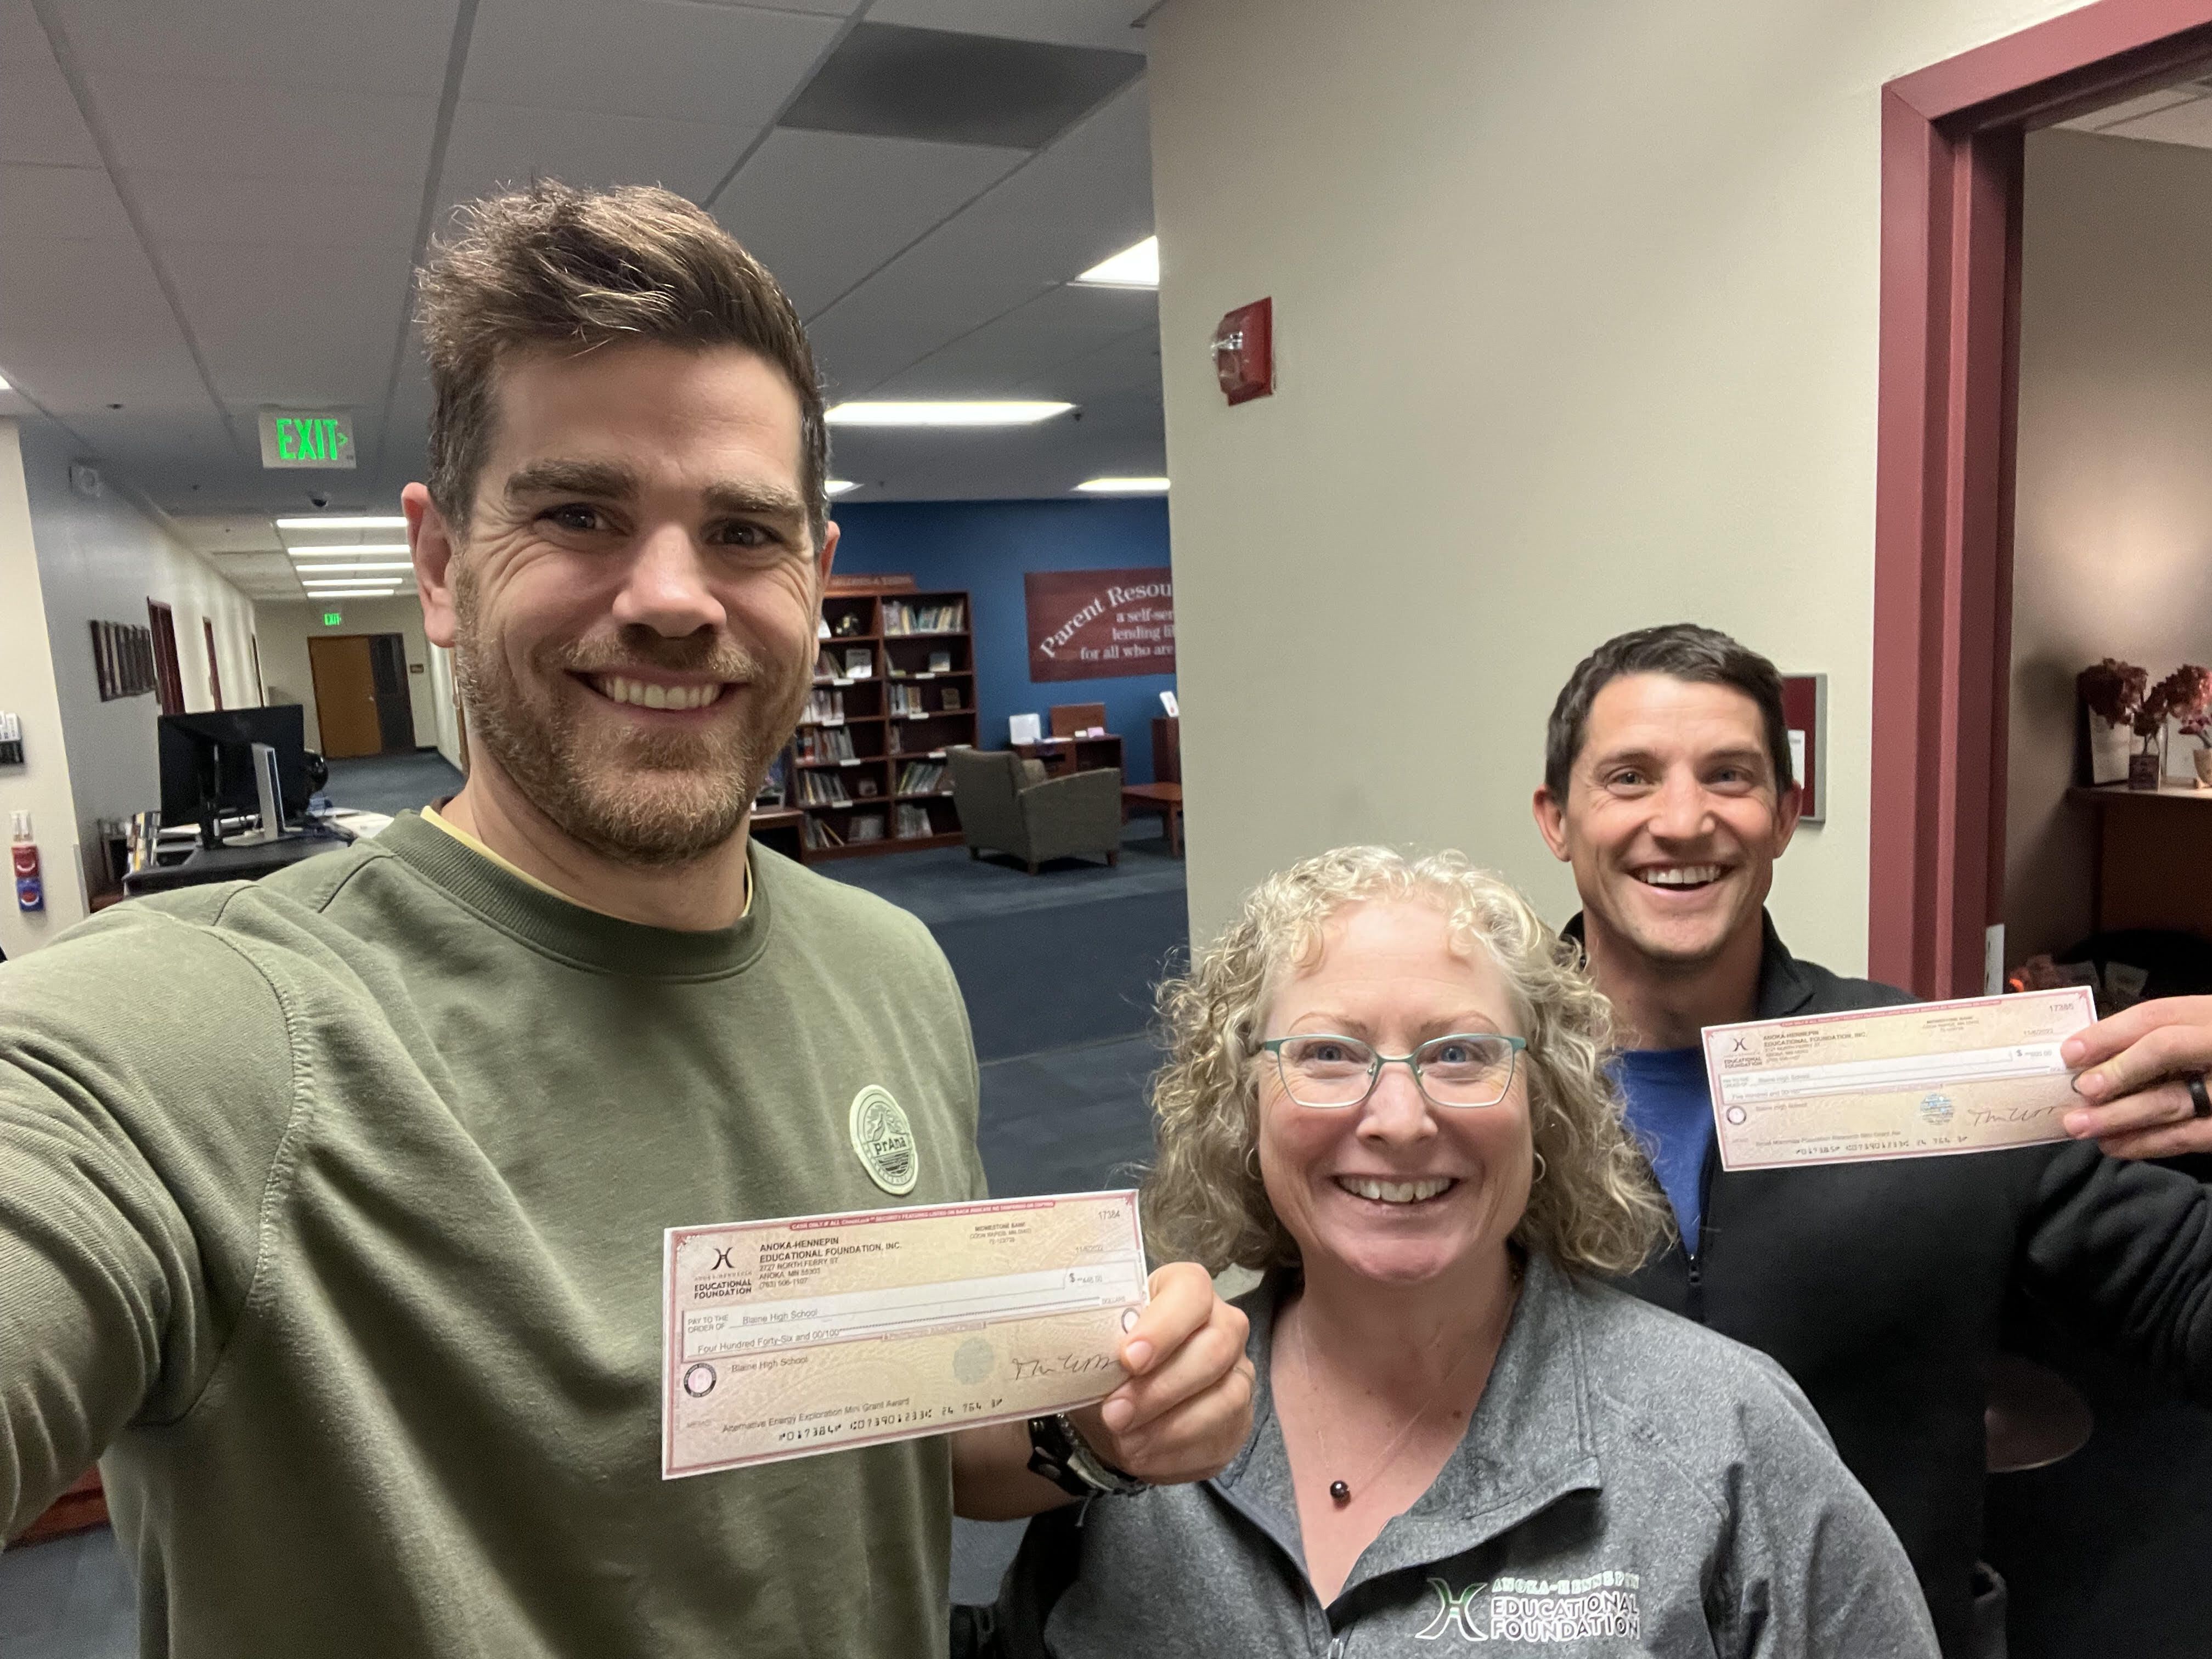 Blaine High School teachers Tim Riordan and Kendrick Novak hold up their mini-grant checks with Tess DeGeest, AHEF executive director, in the middle of the photo taken in the ESC hallway.